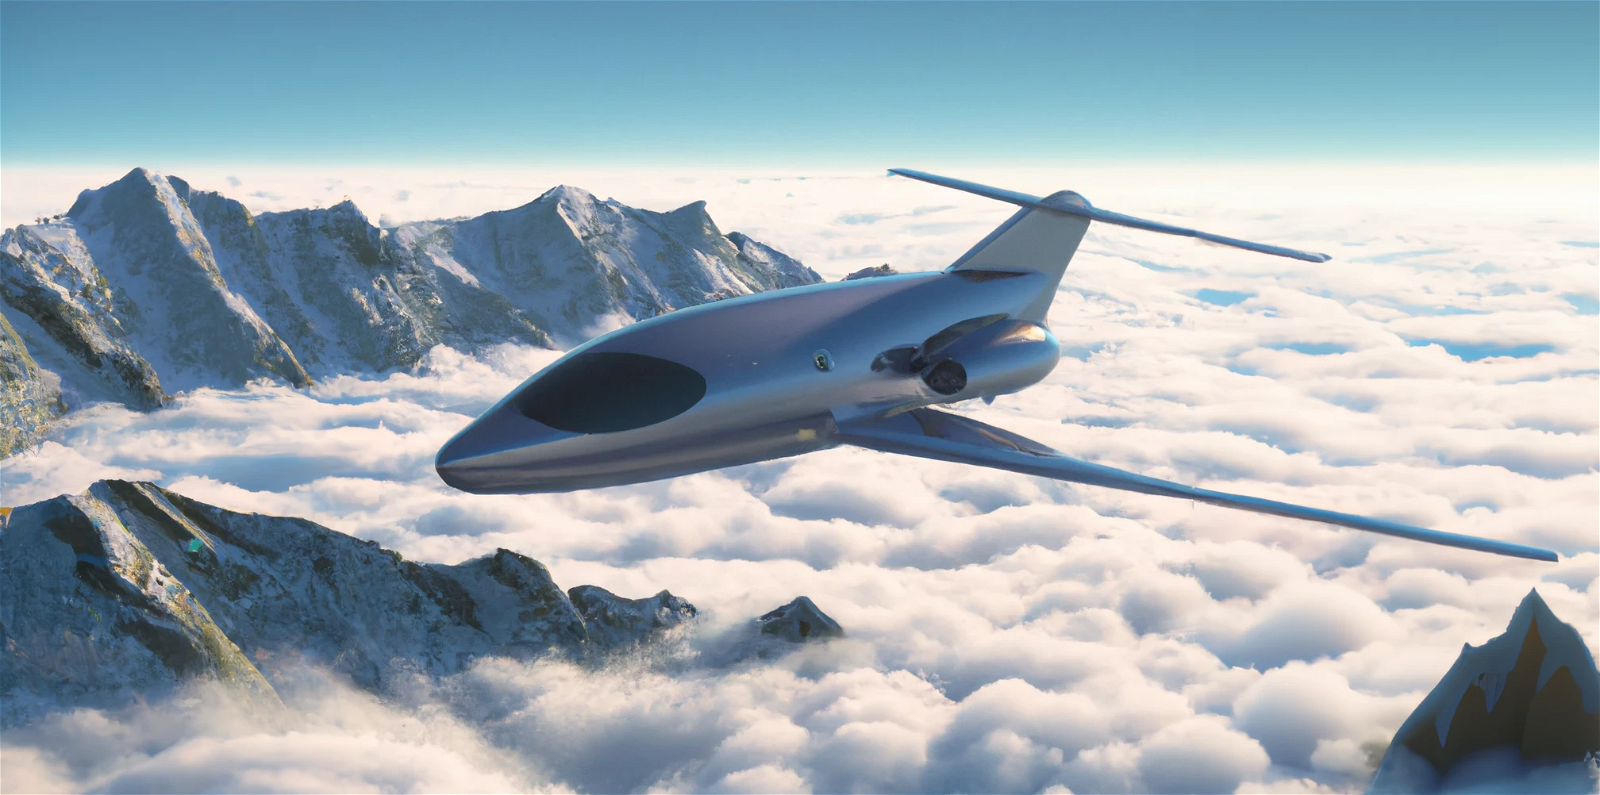 Figure 1: DALL·E generated image of a futuristic electric passenger airplane flying above white clouds and mountains, digital art